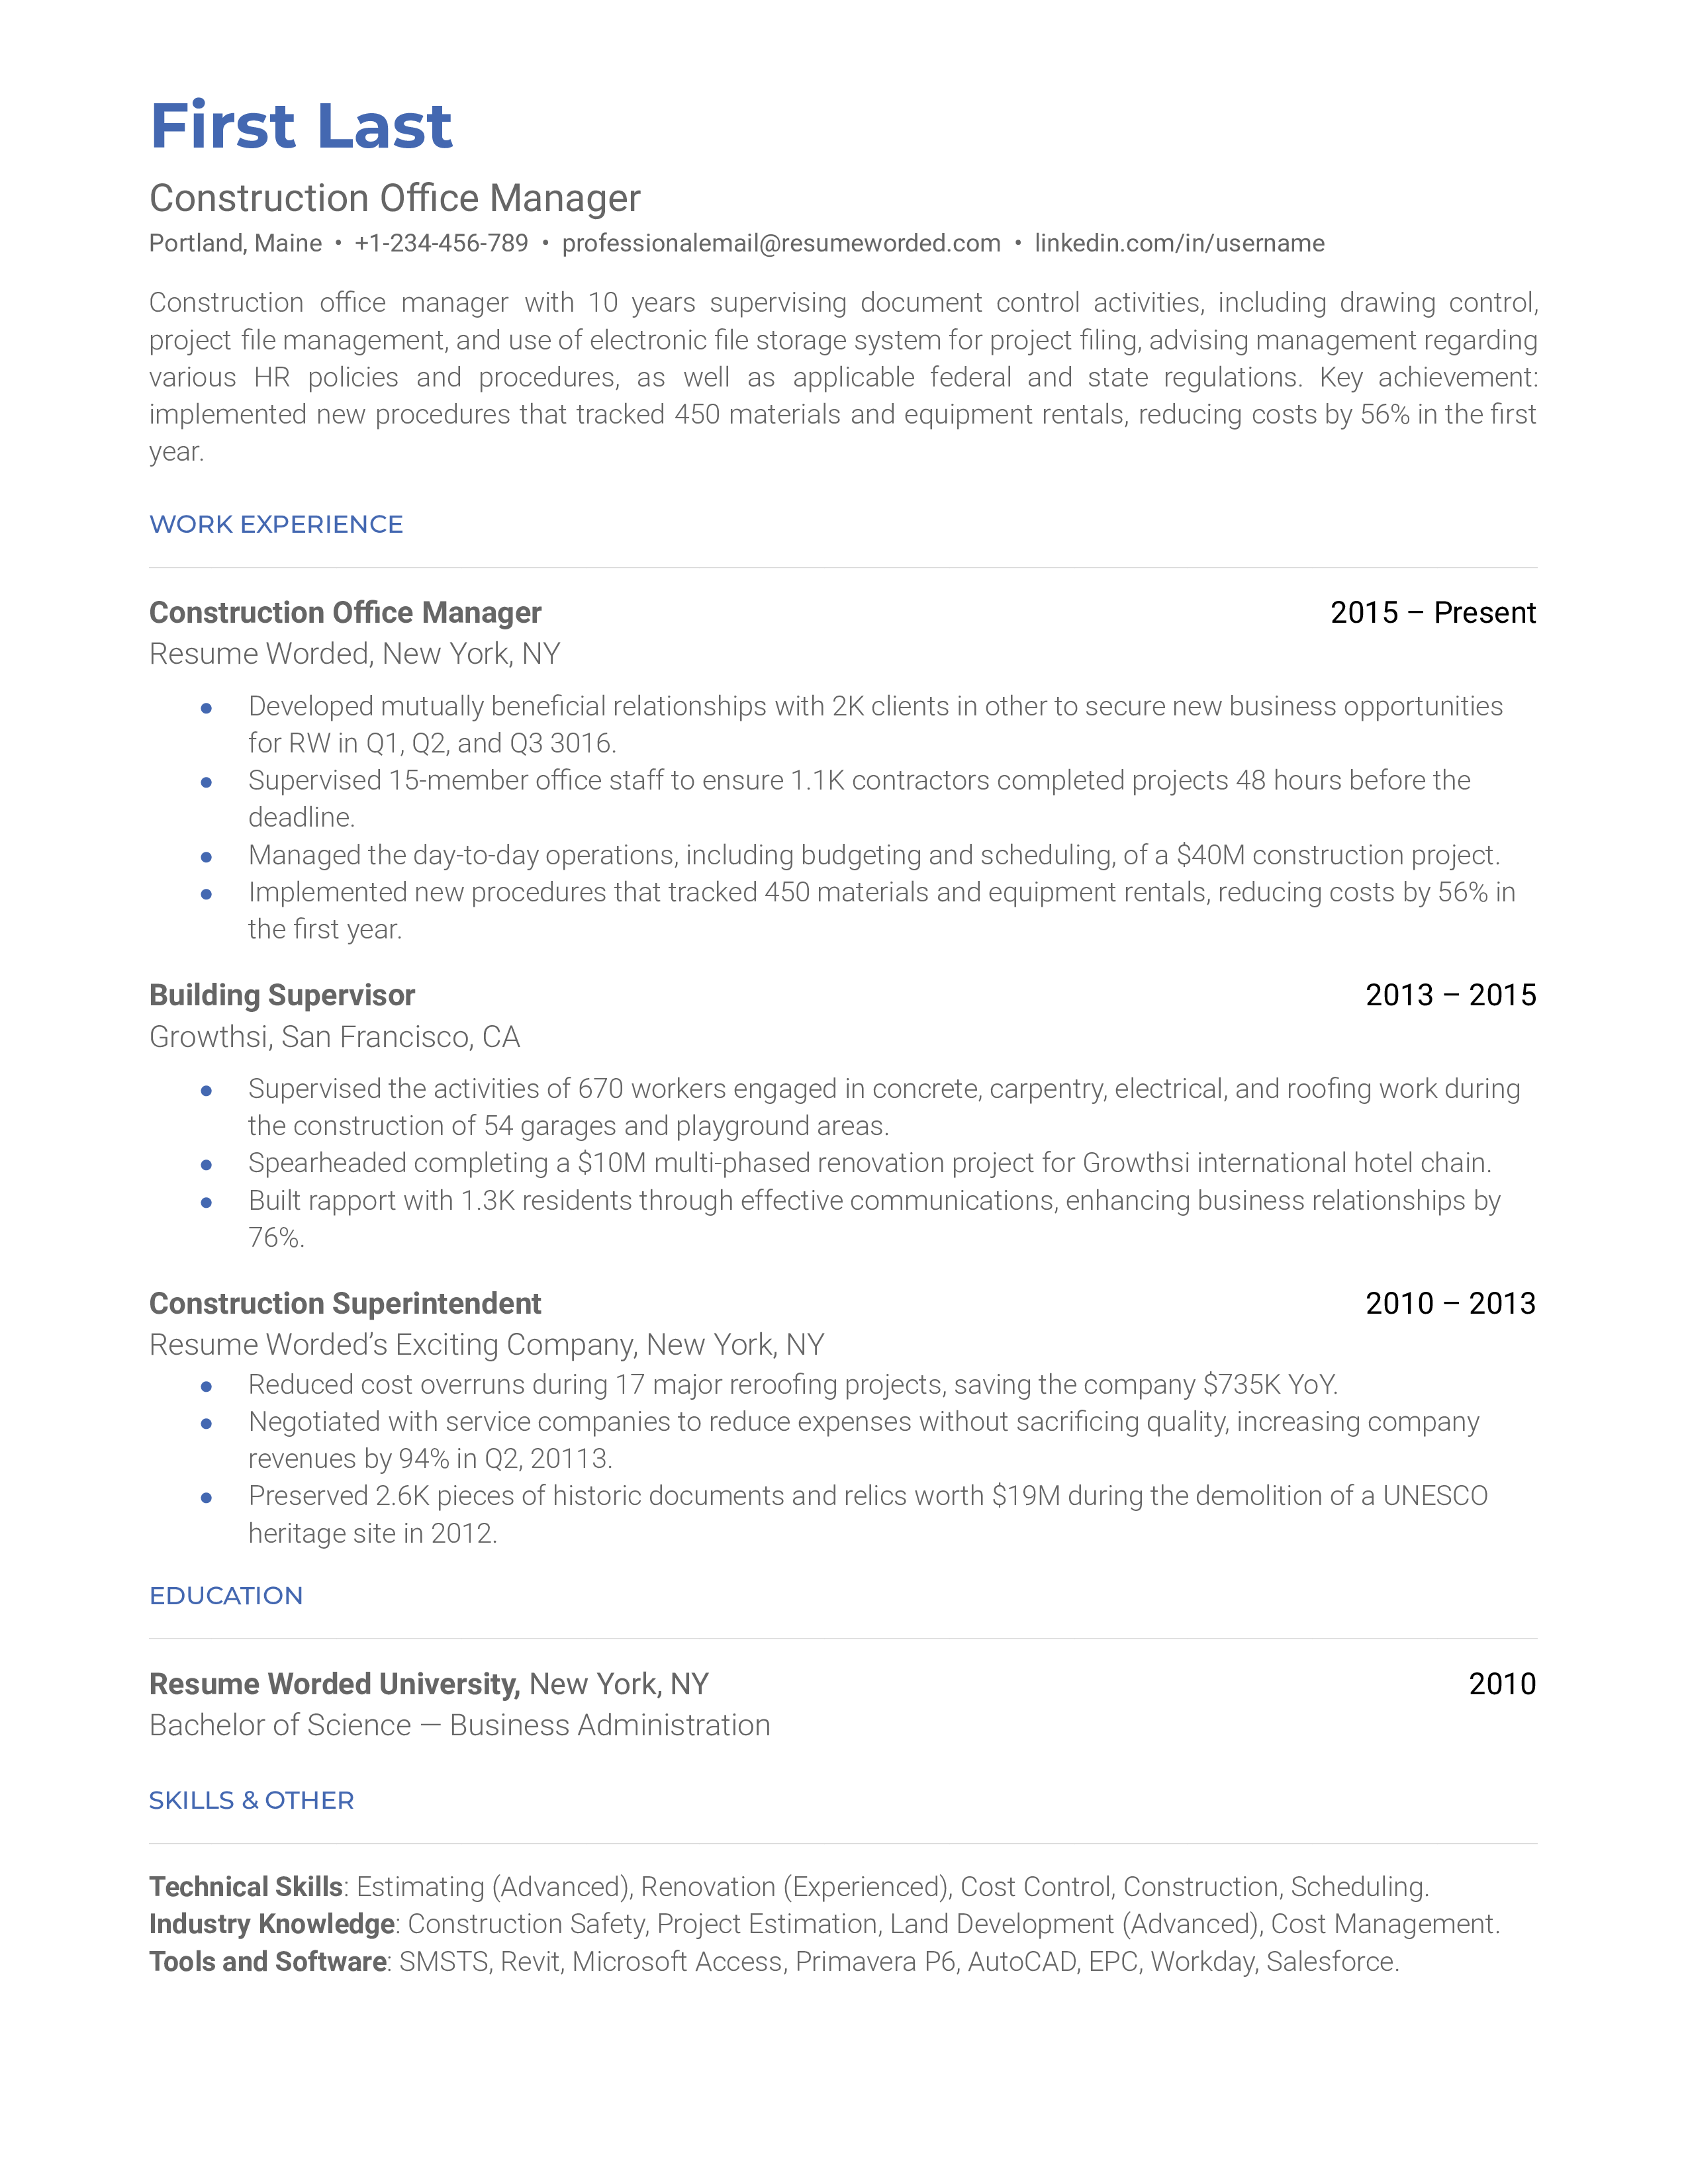 Construction Office Manager Resume Sample